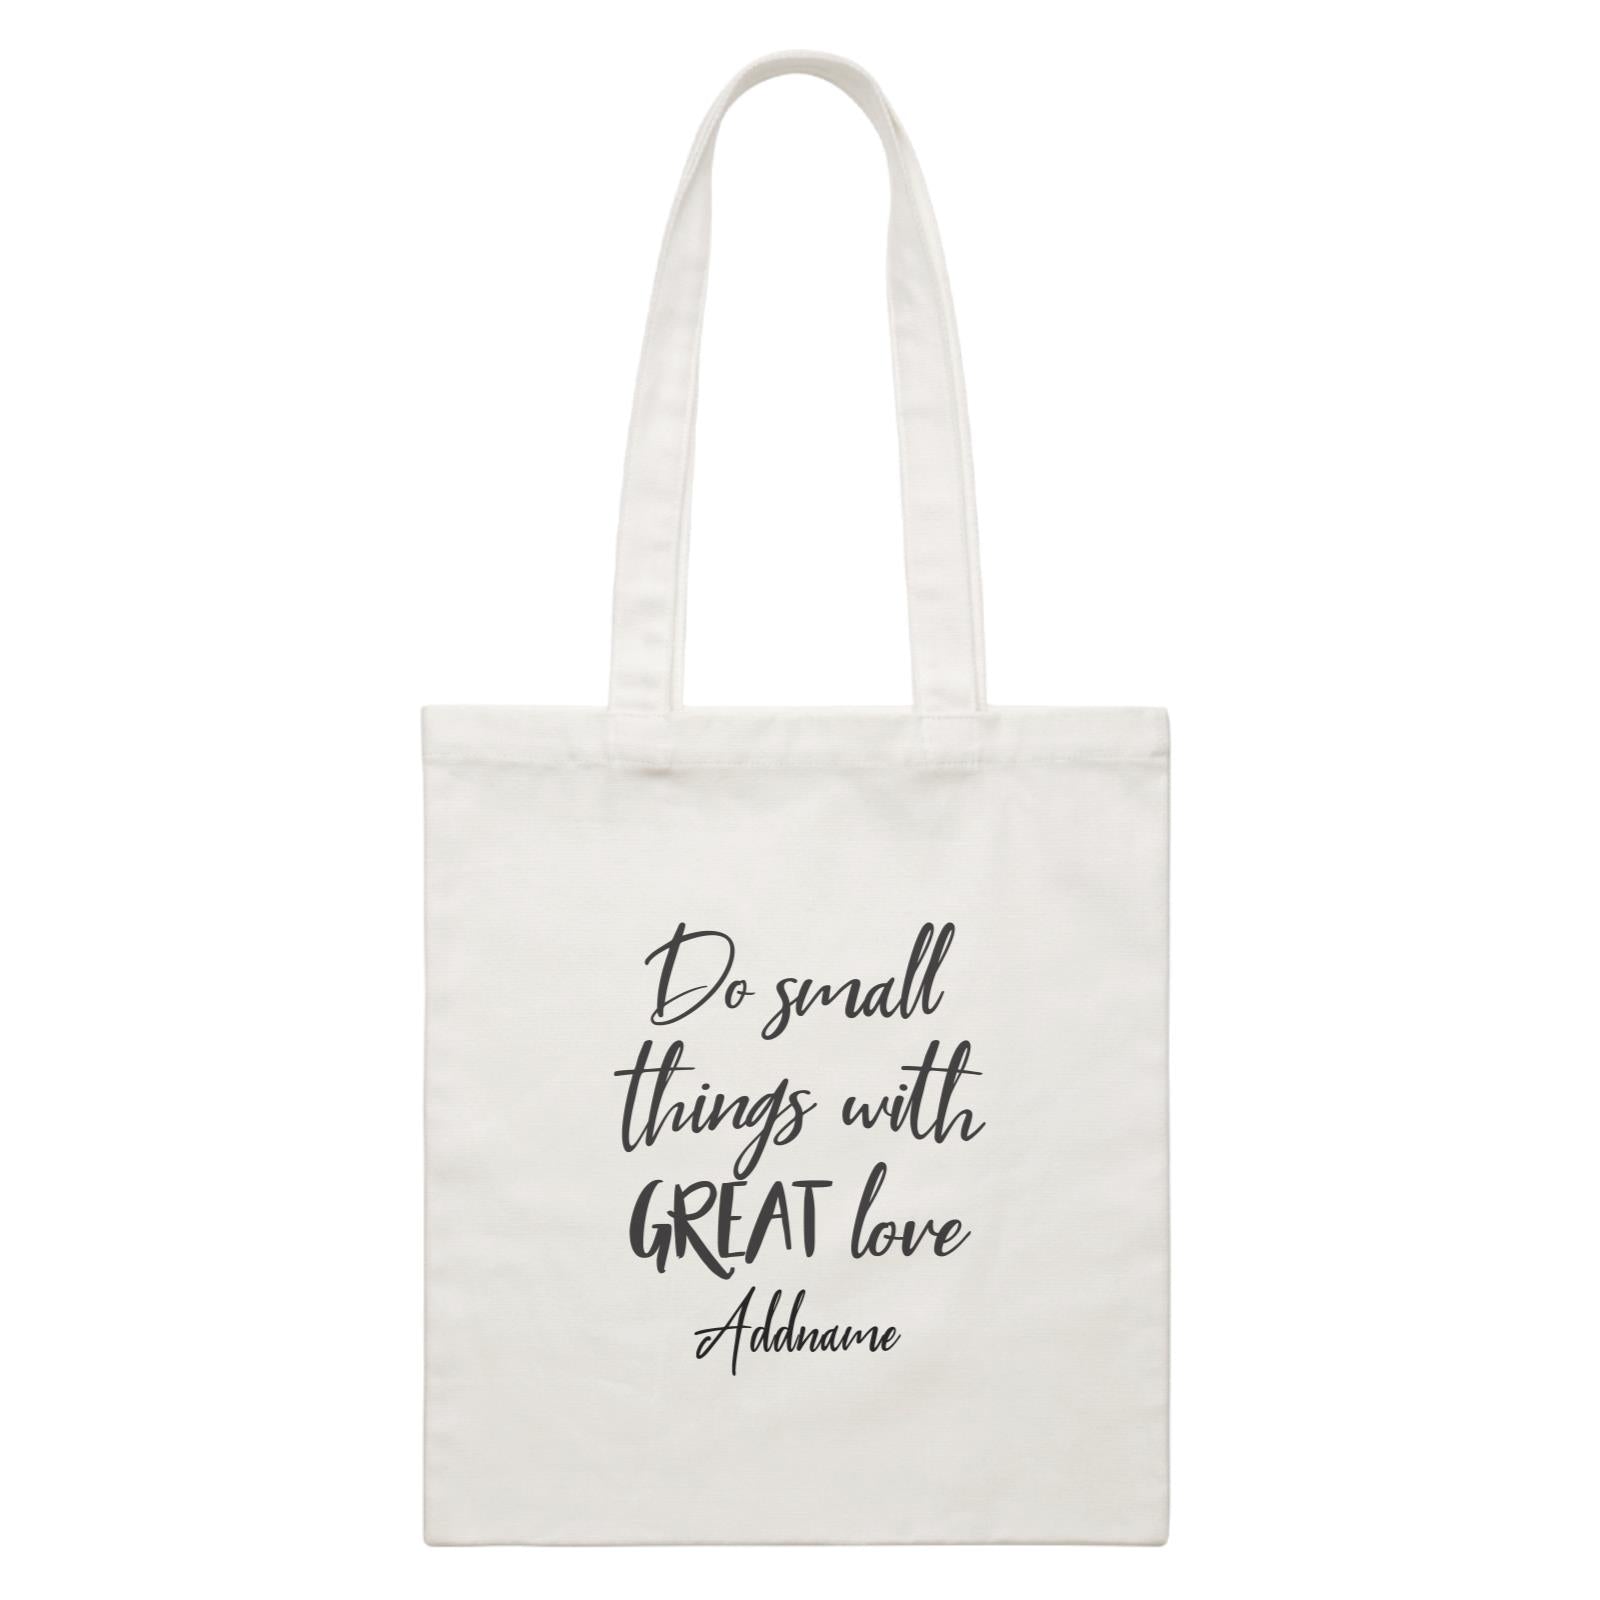 Inspiration Quotes Do Small Things With Great Love Addname White Canvas Bag